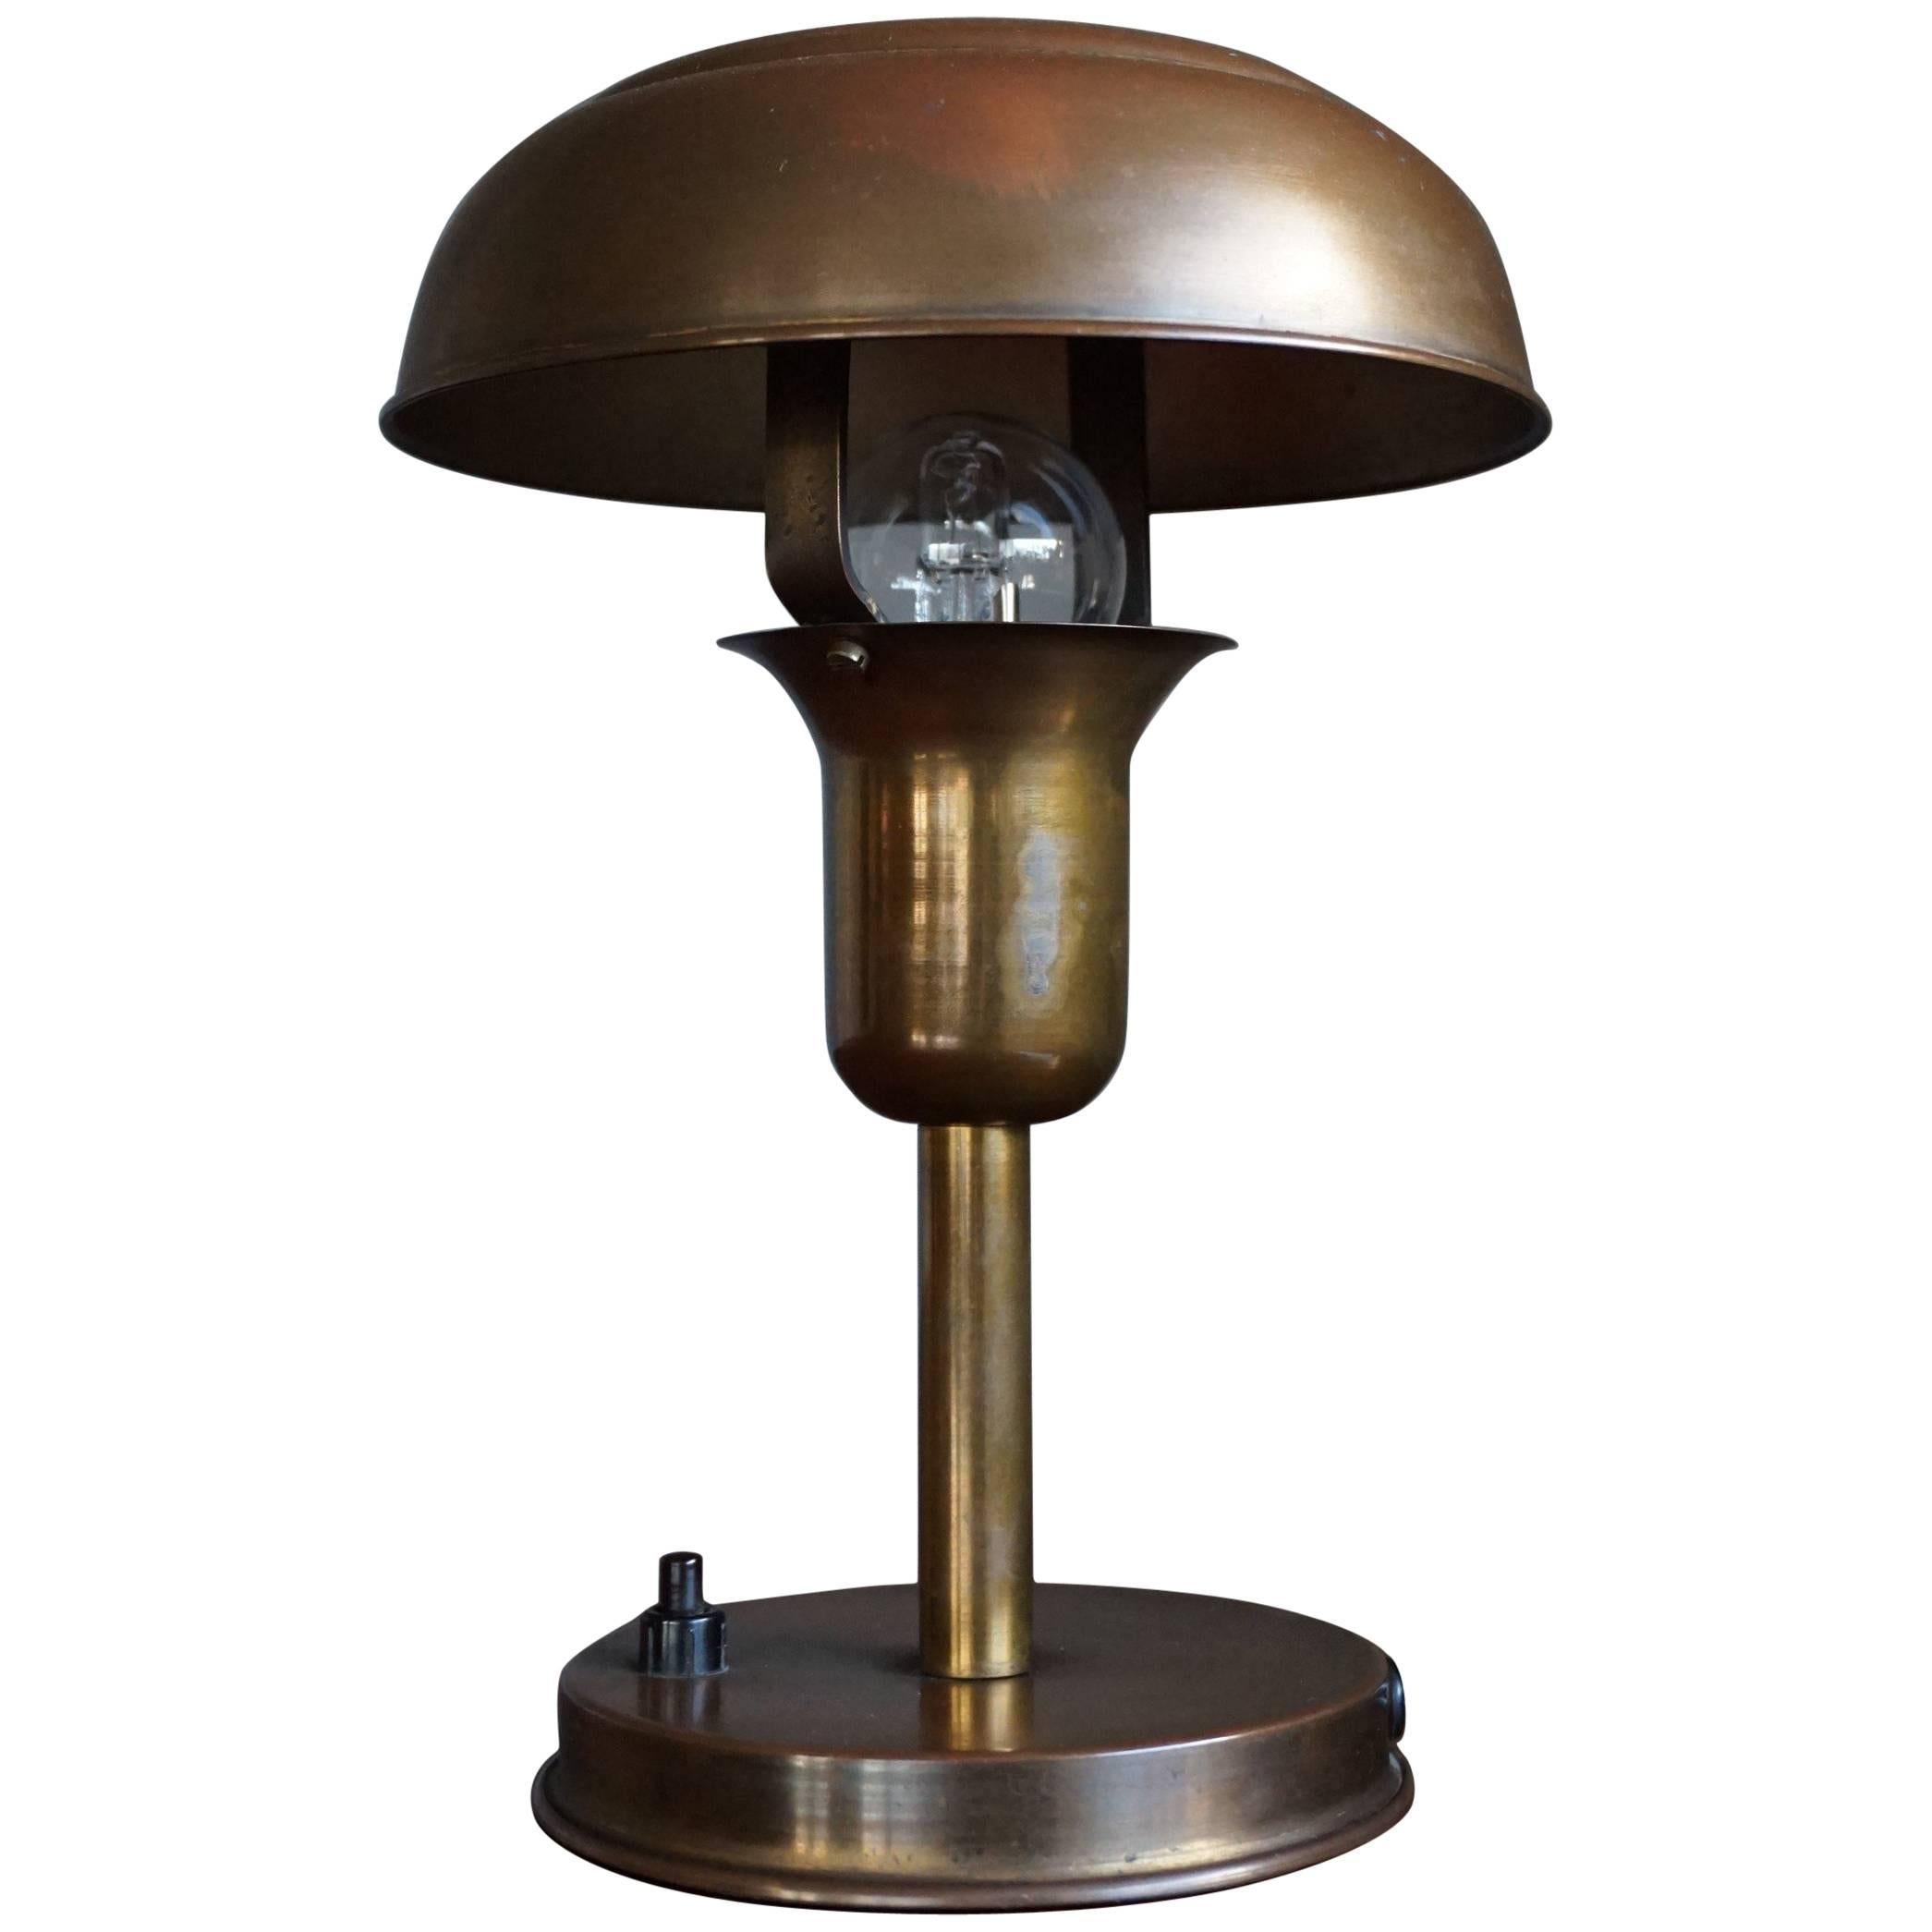 Rare and Highly Stylish 1930s Little Copper Metal Art Deco Table or Desk Lamp